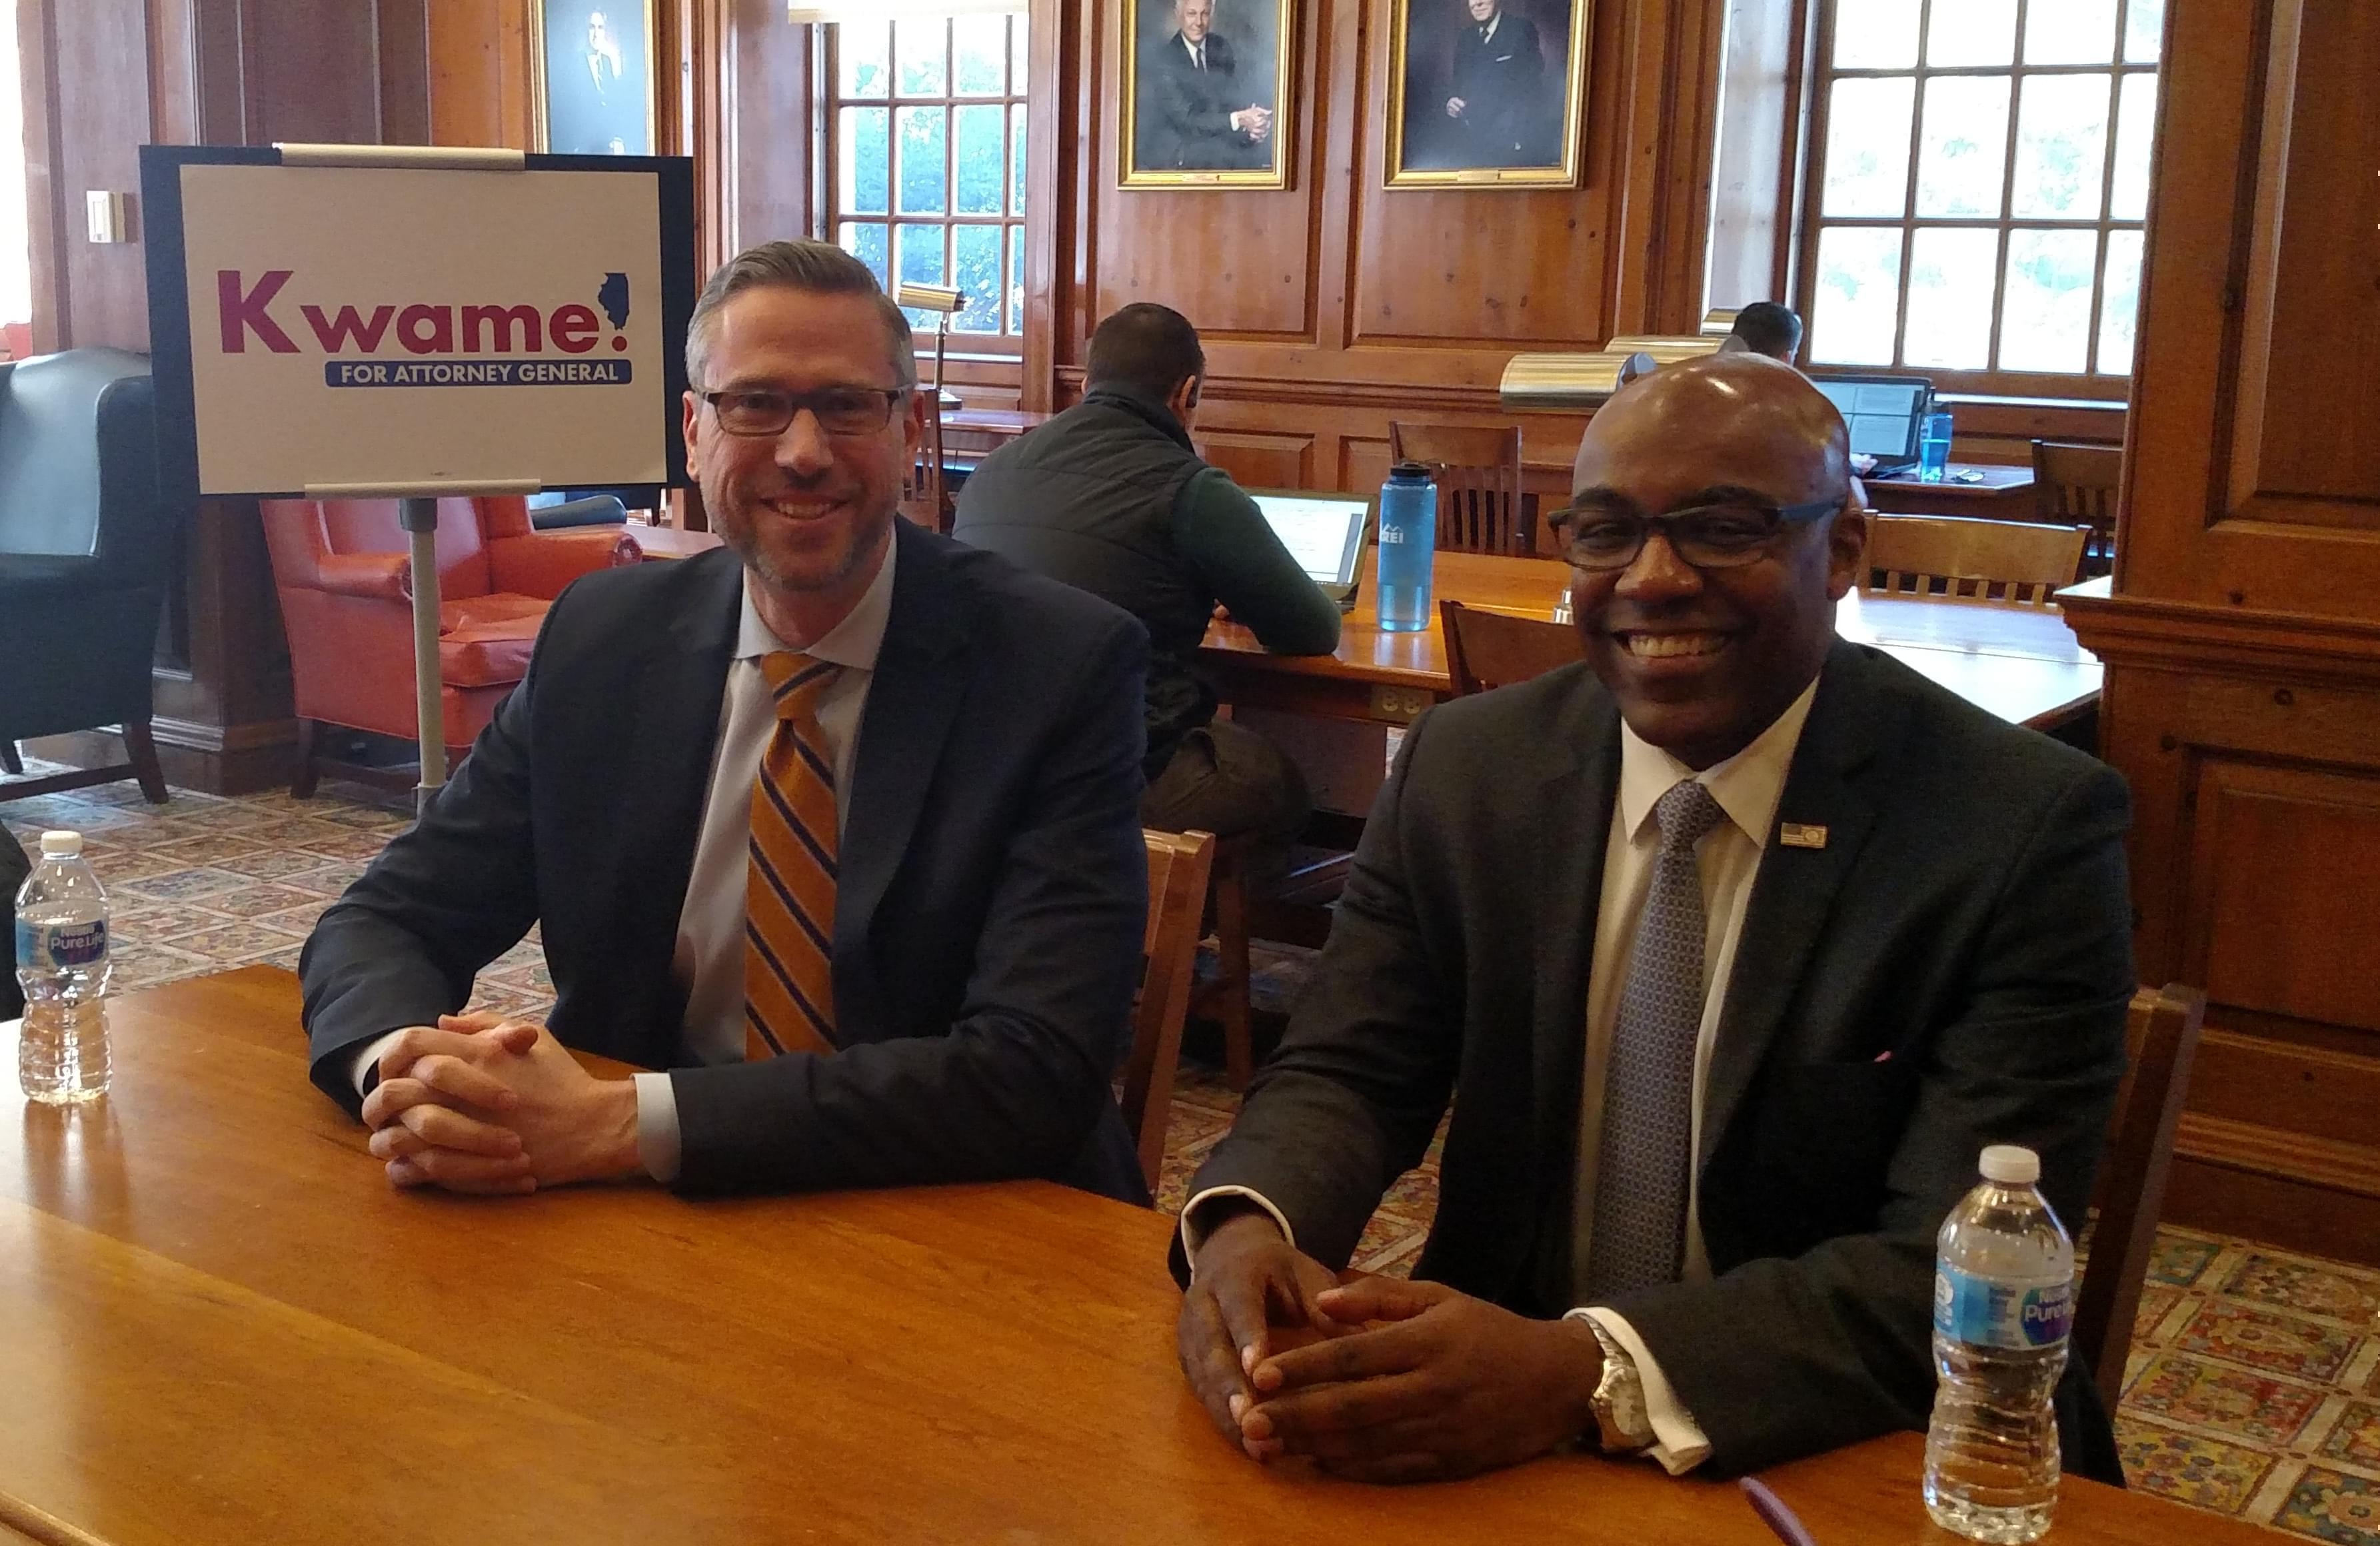 State Treasurer Mike Frerichs and Attorney General candidate Kwame Raoul. 